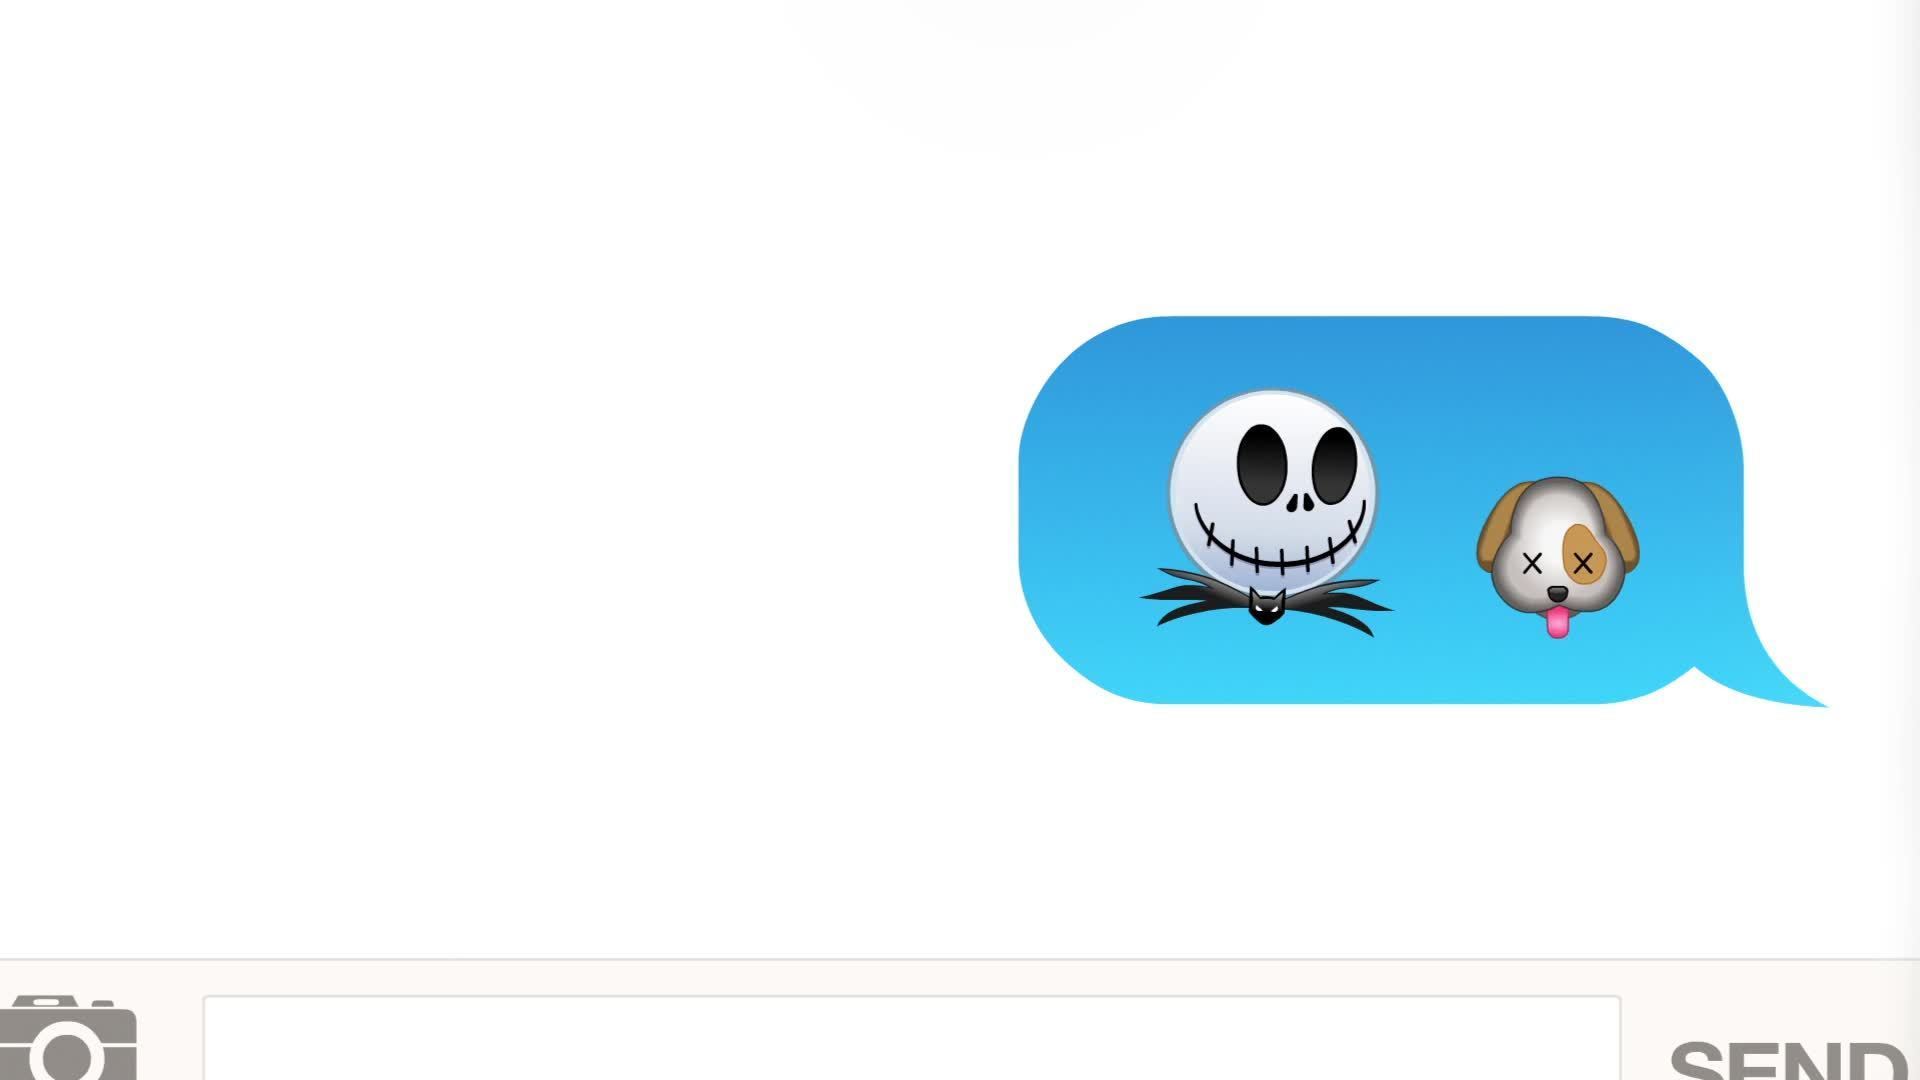 The Nightmare Before Christmas As Told by Emoji